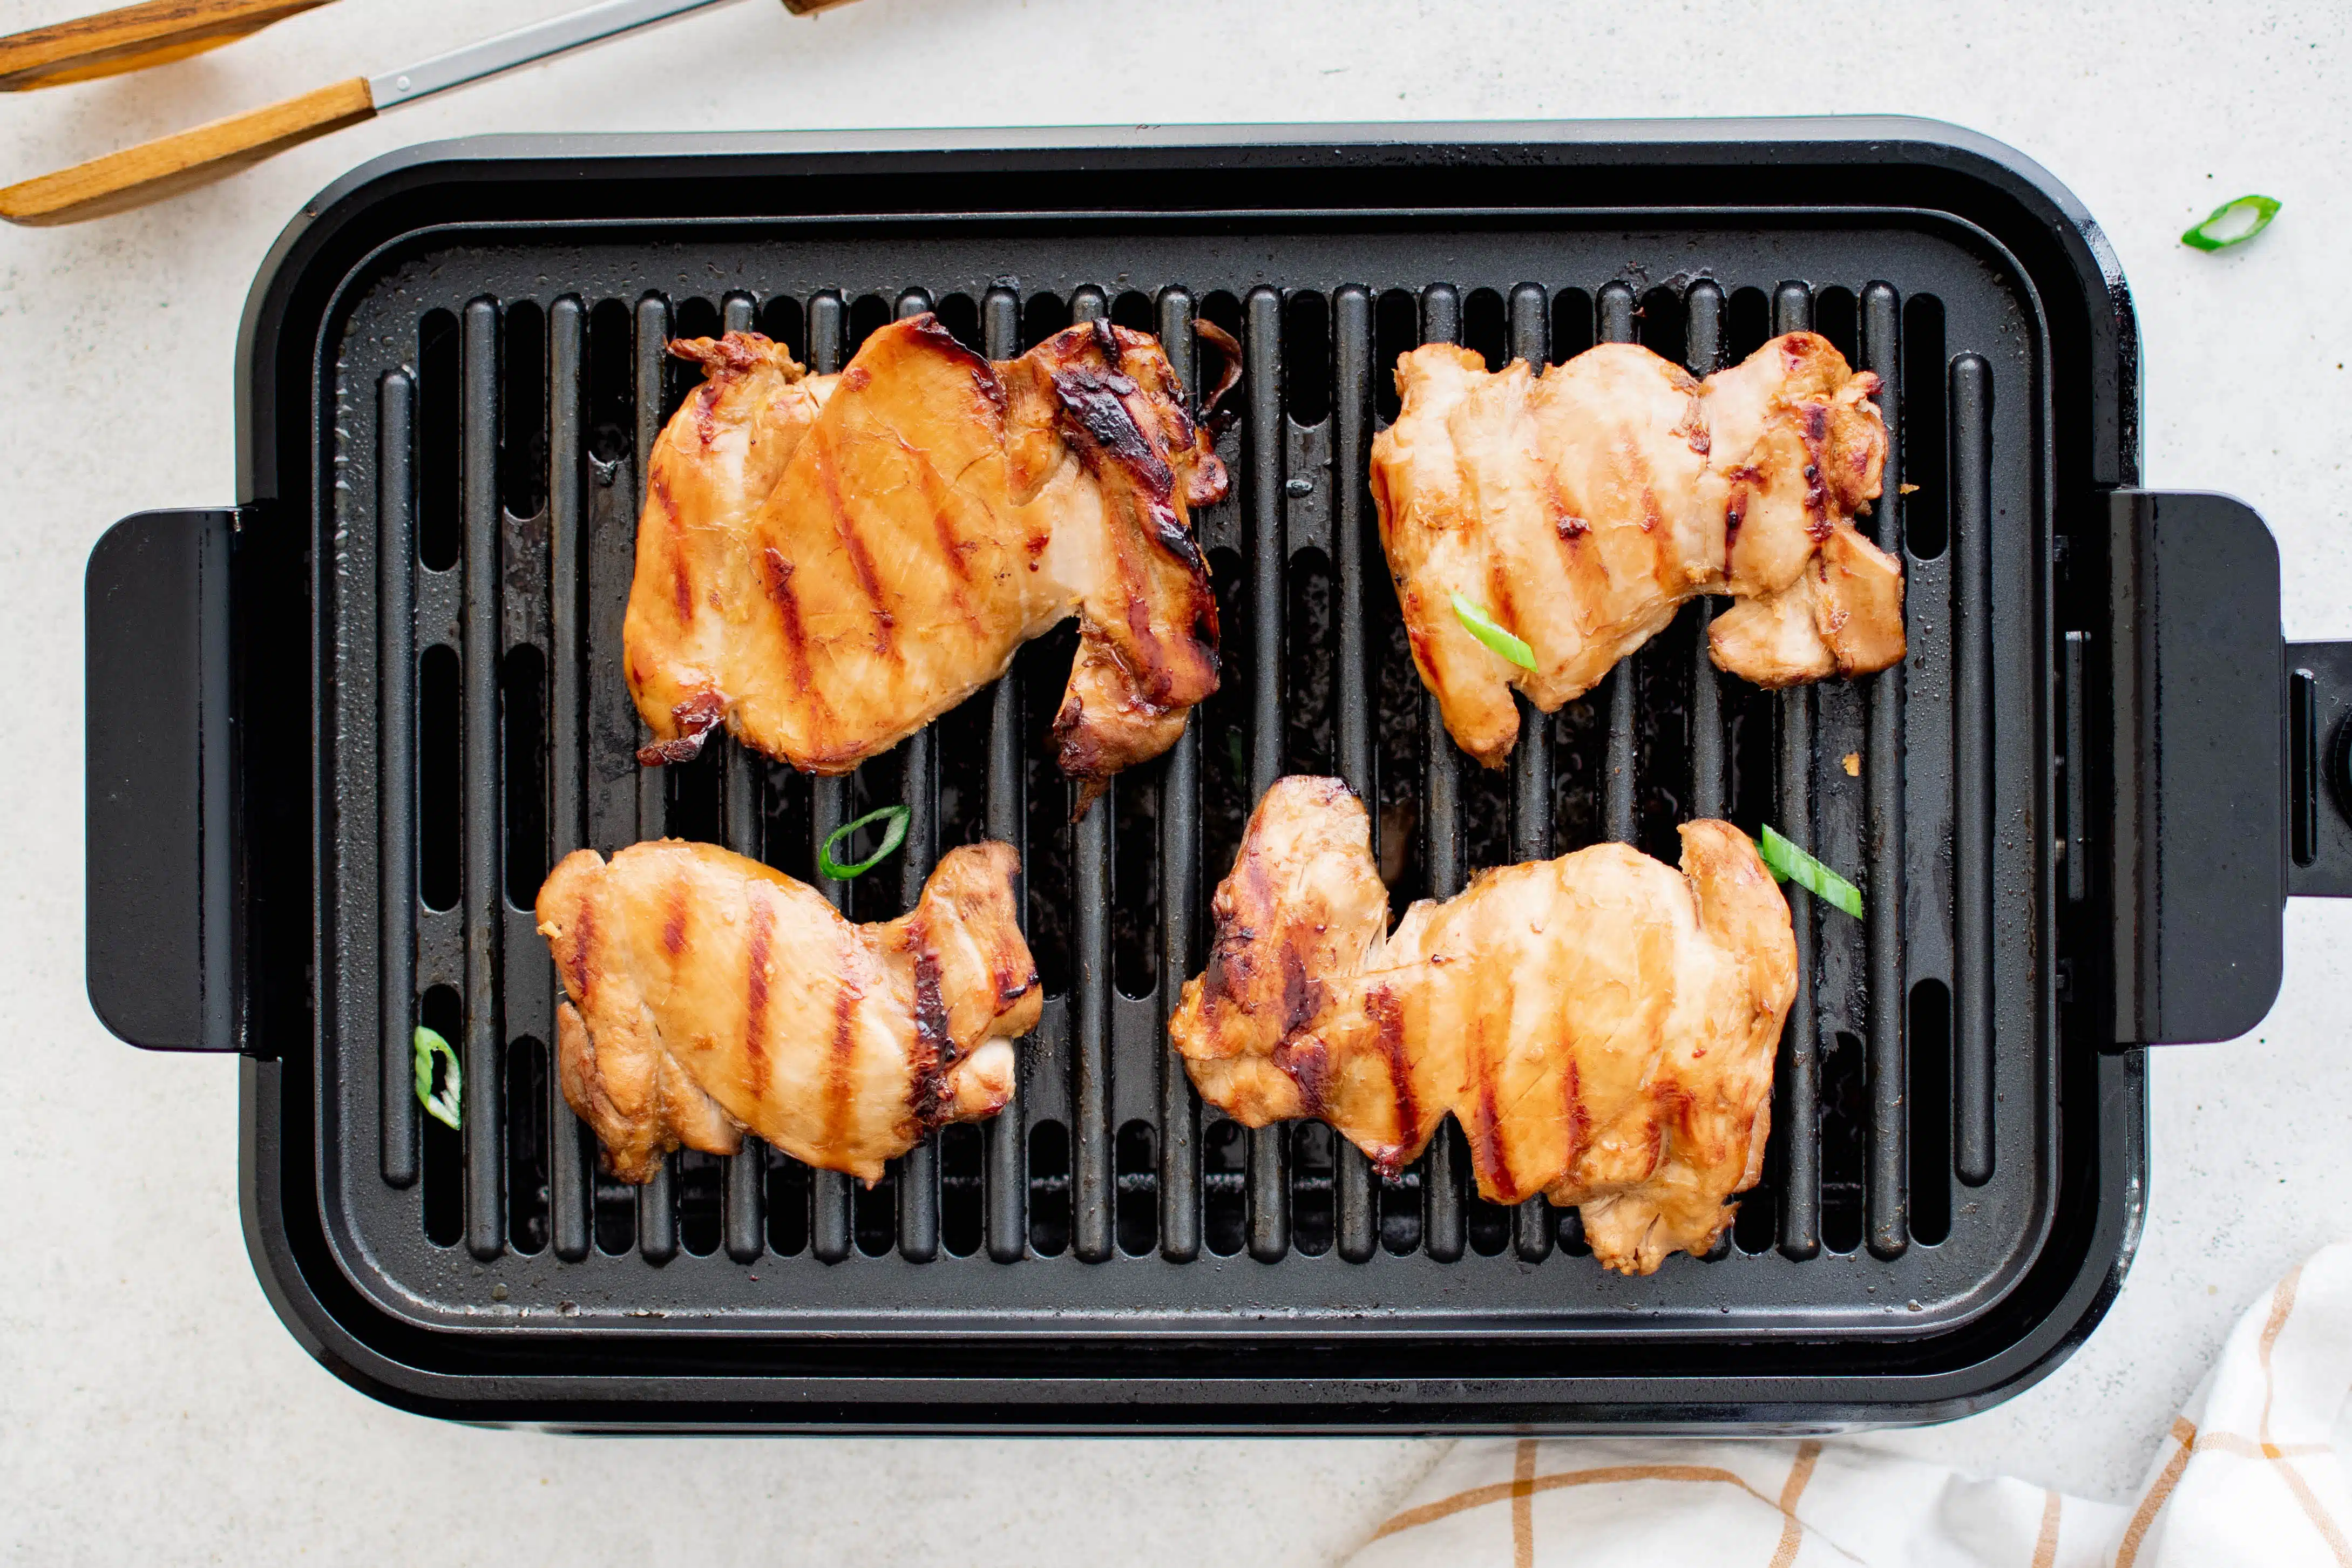 Four marinated boneless skinless chicken thighs cooking on an indoor electric grill.